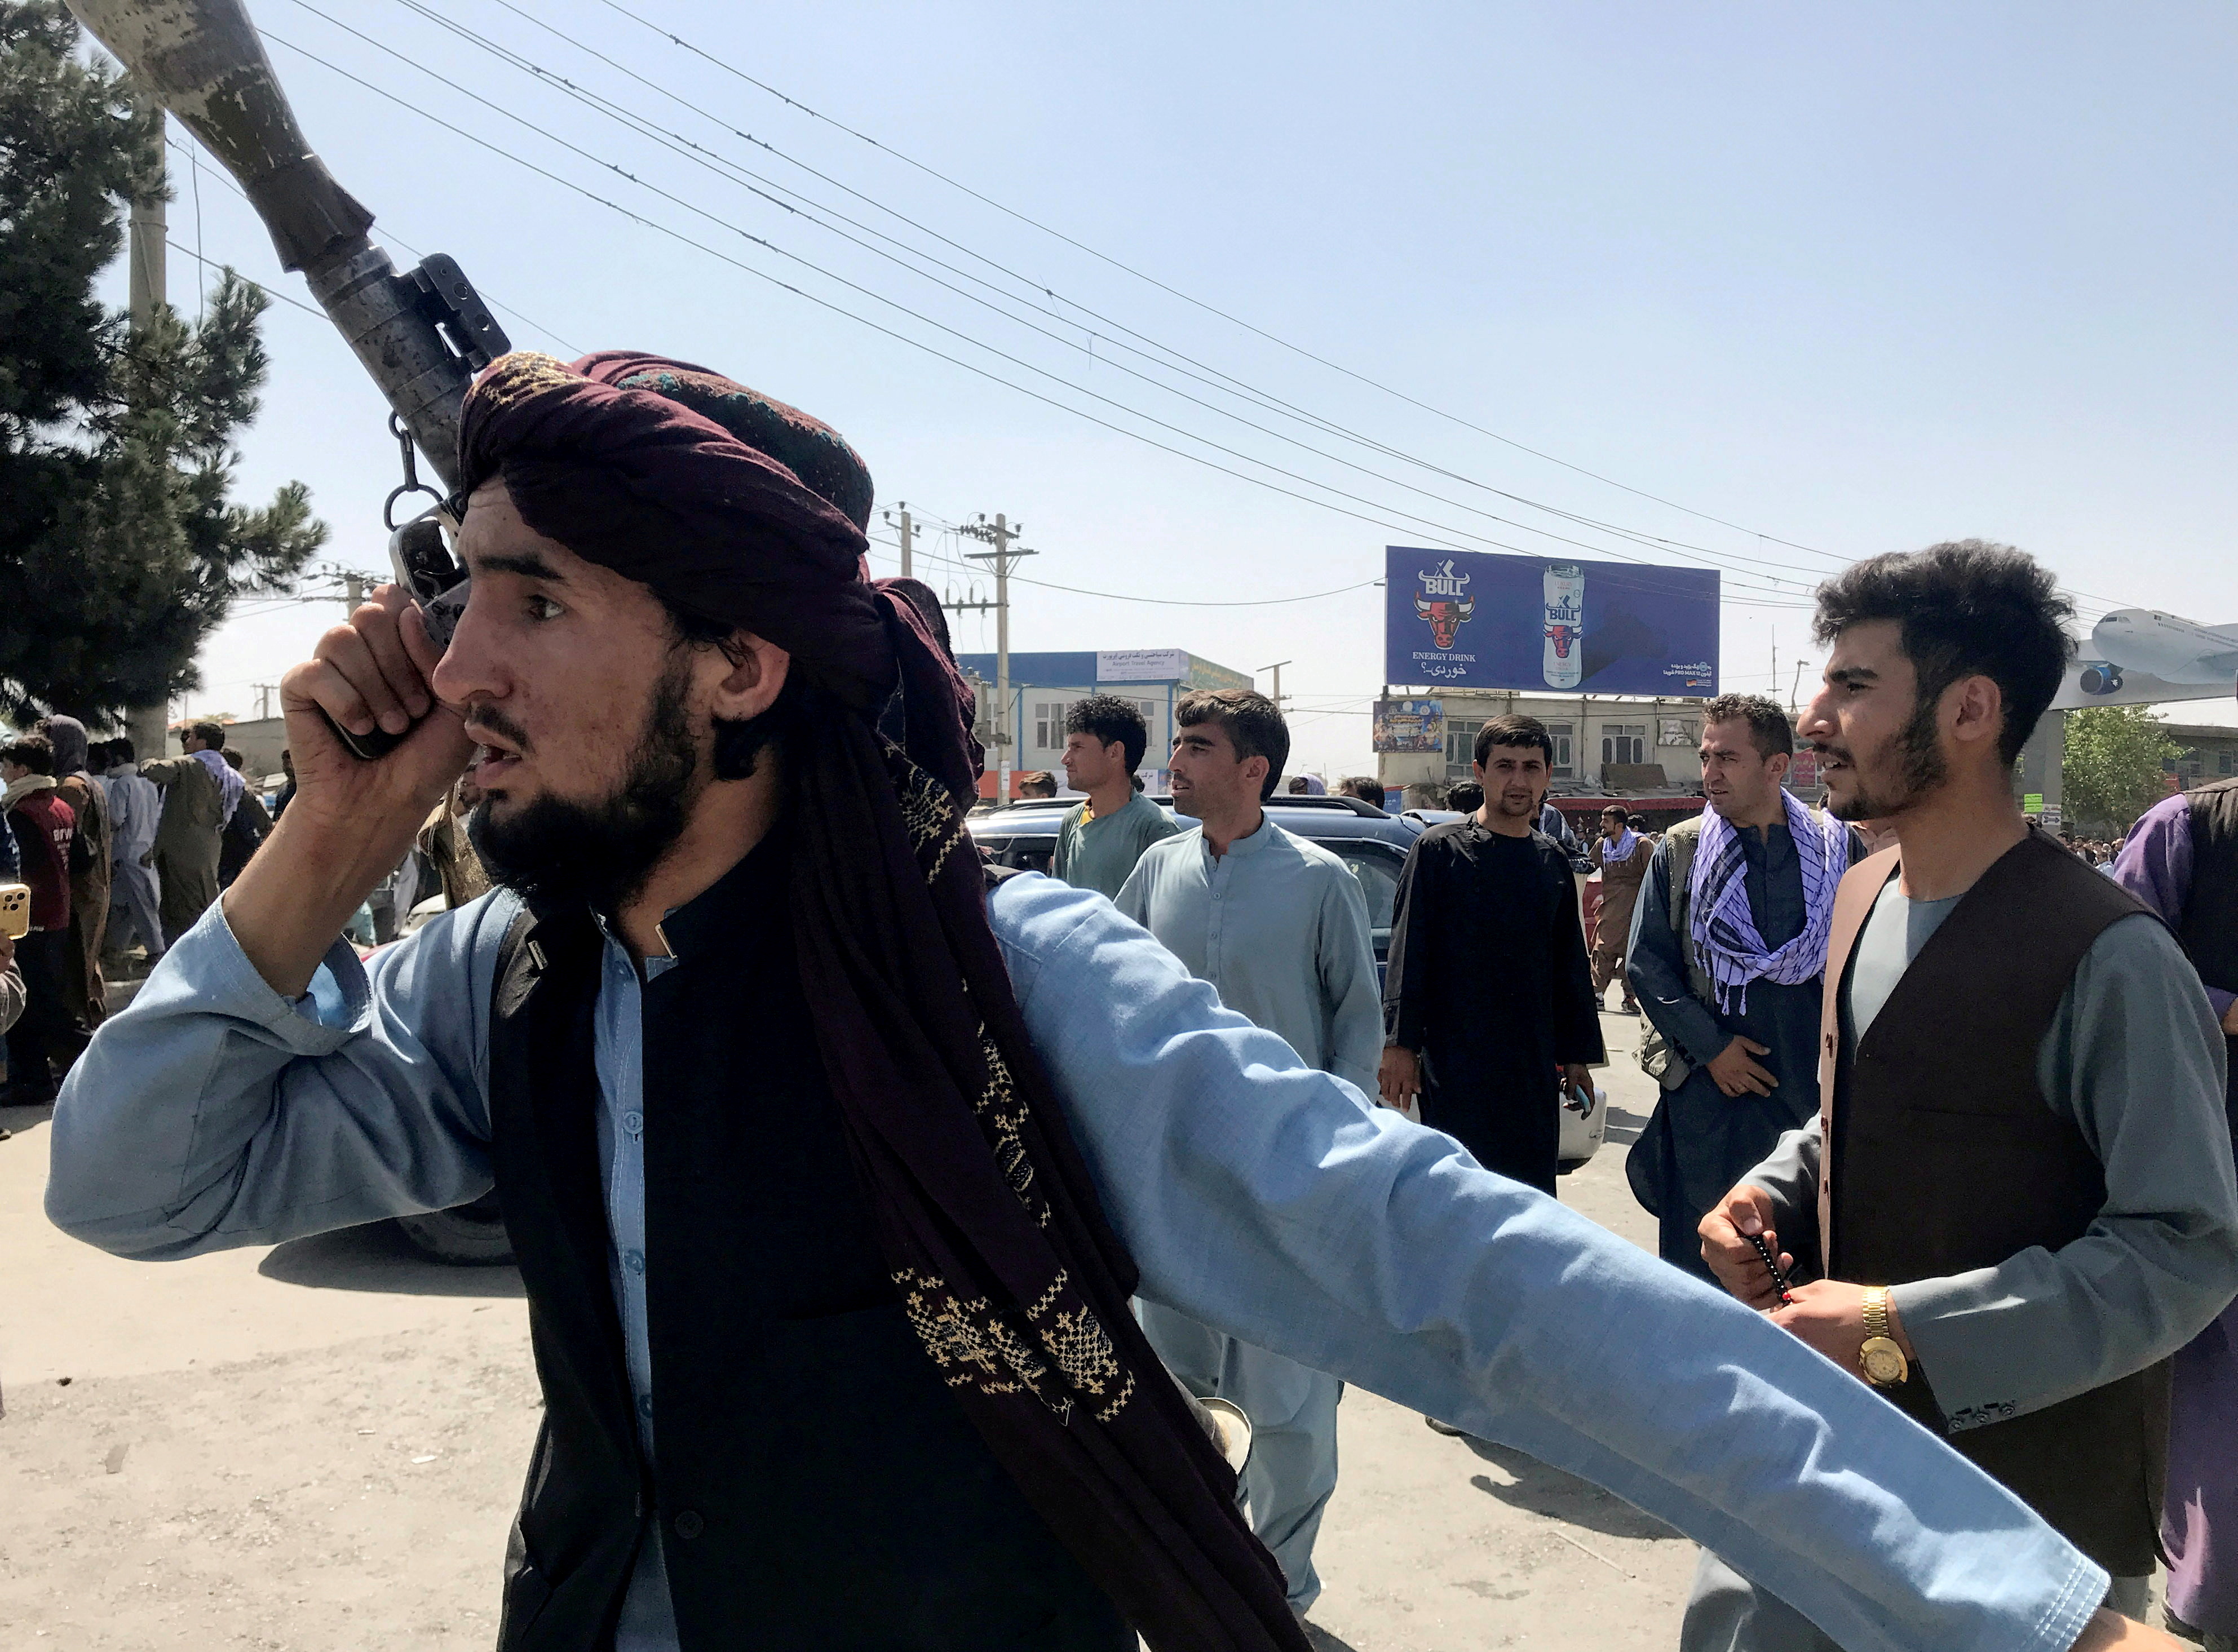 A member of Taliban forces inspects the area outside Hamid Karzai International Airport in Kabul